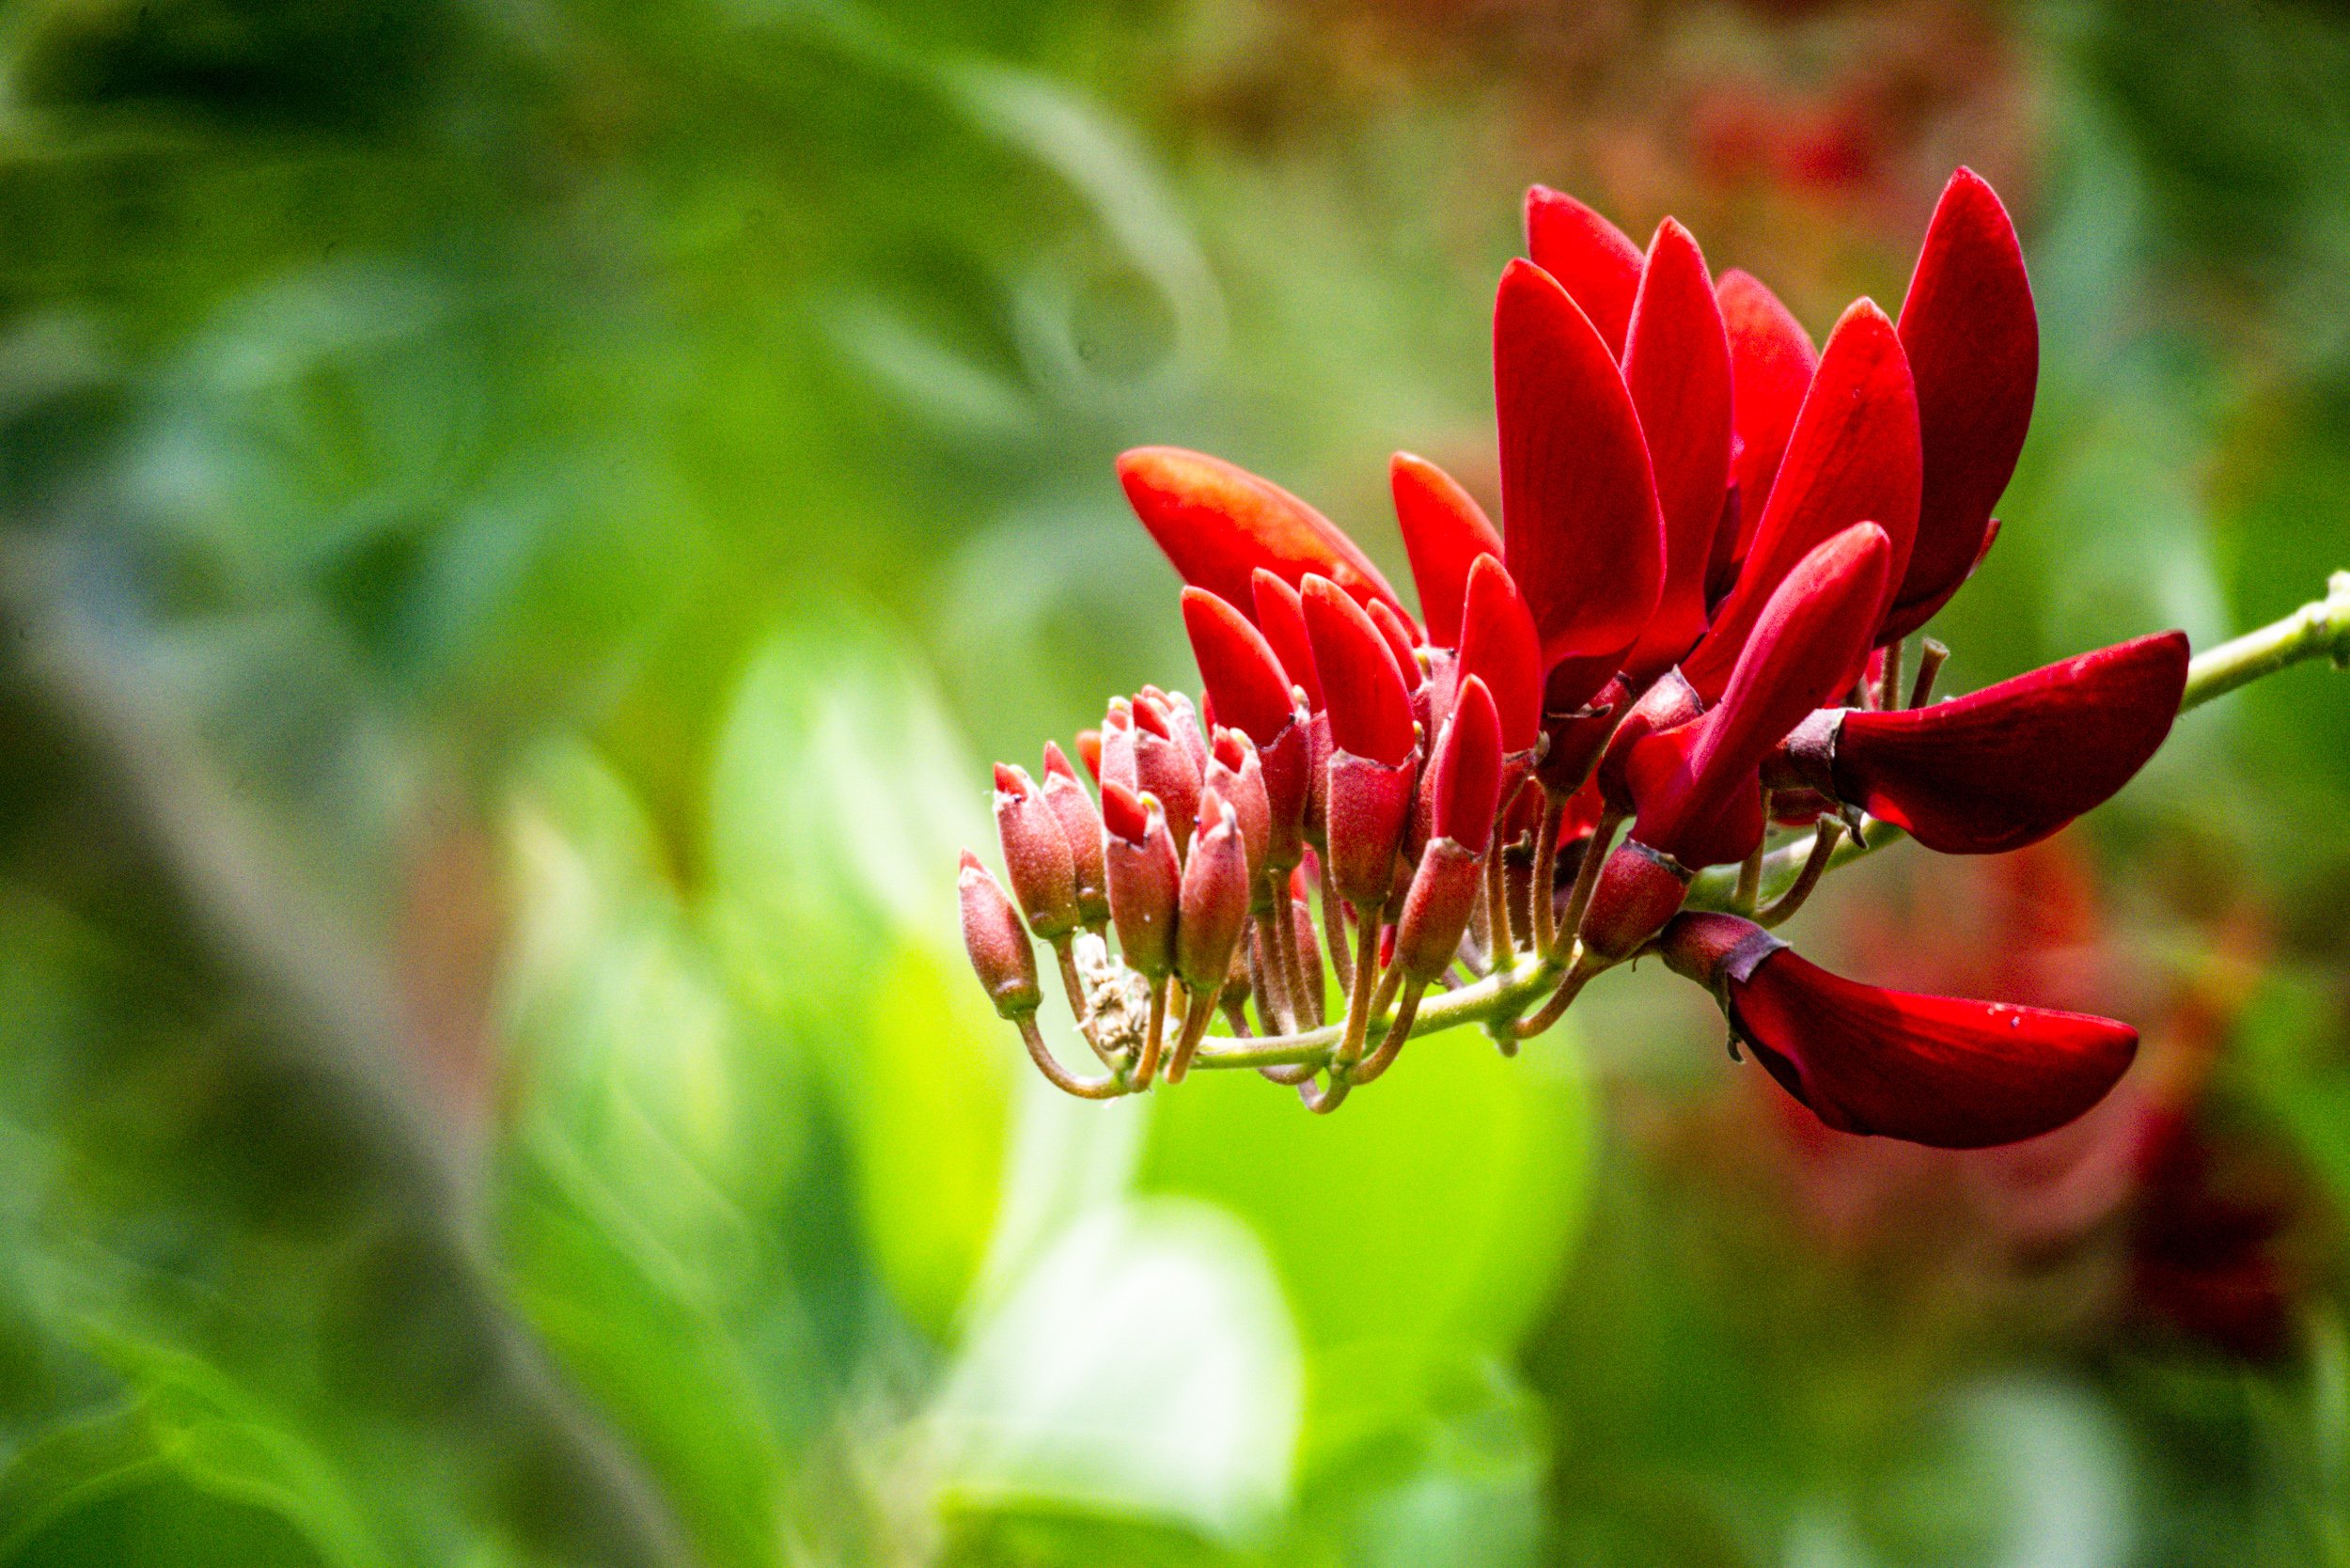 Red flowers with a shallow depth of field for what what Causes a Blurry Photo